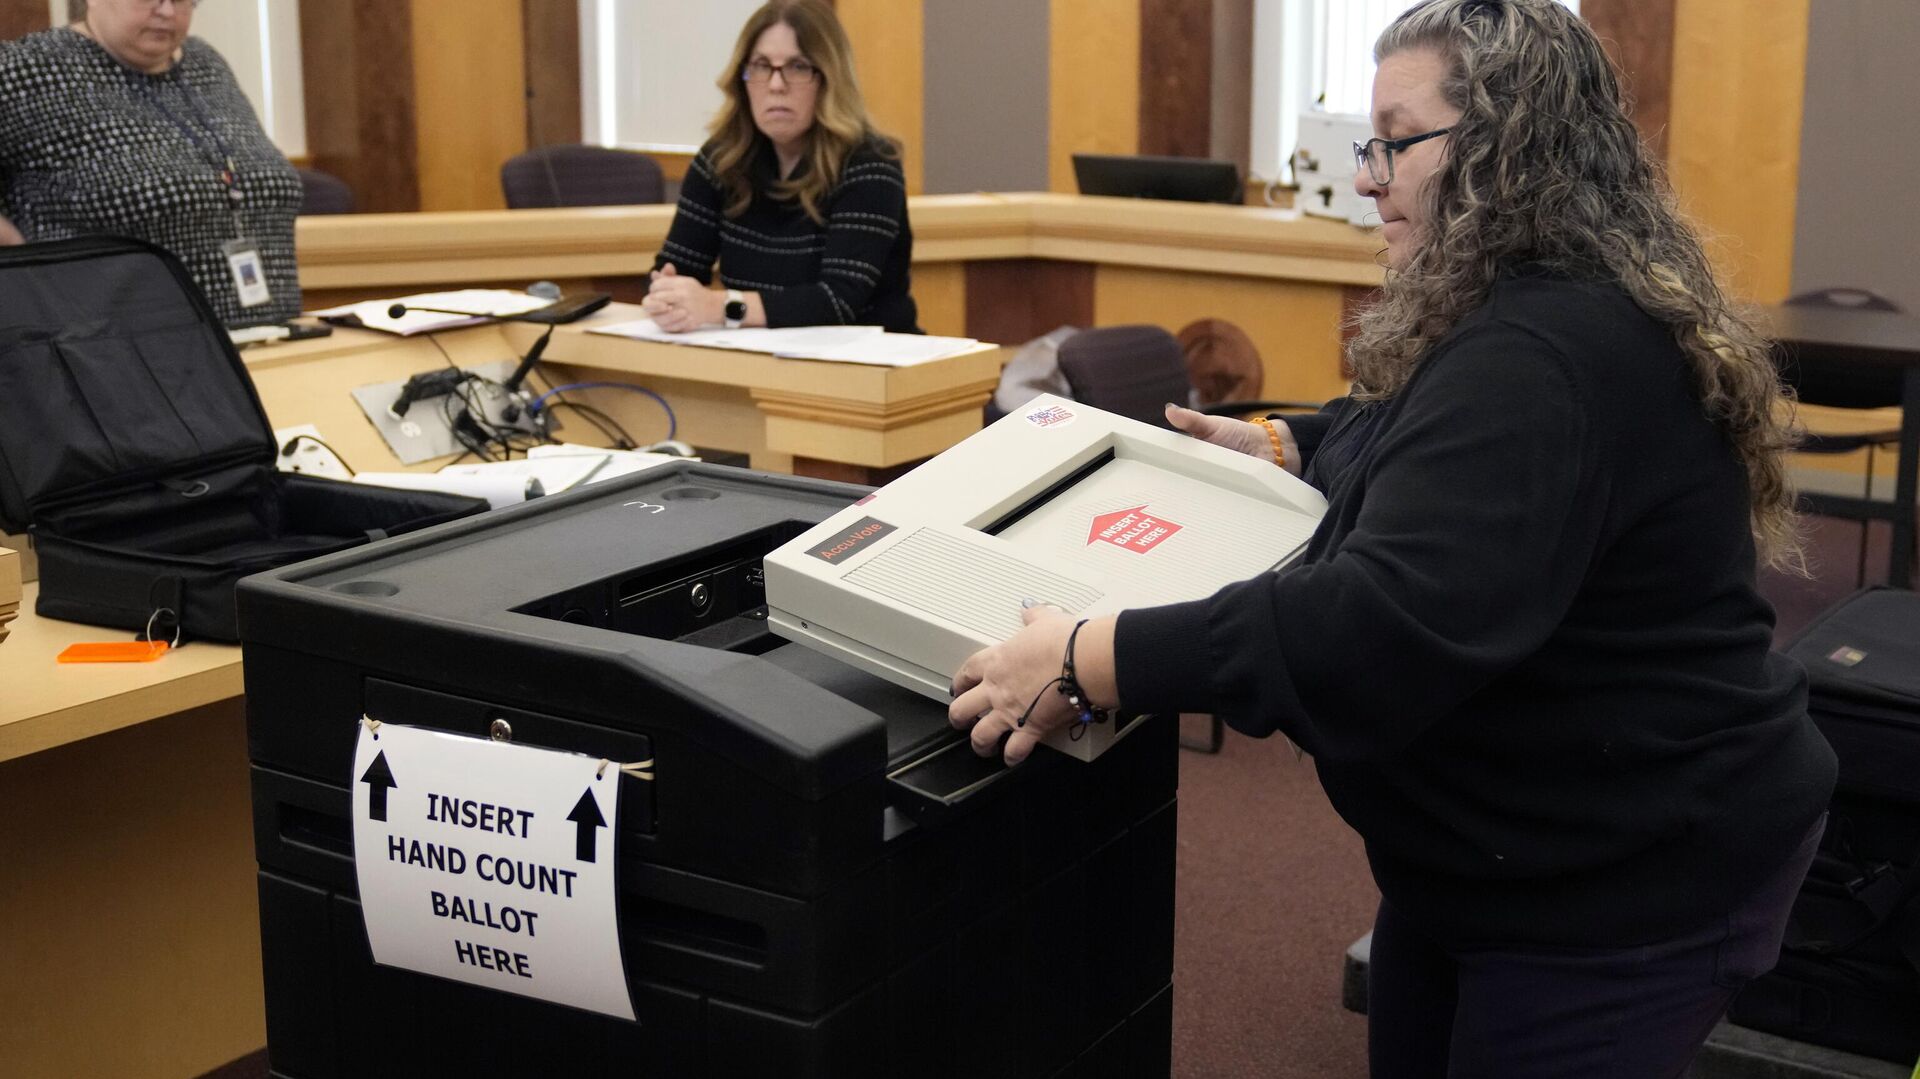 Lisa Hultgren, the Derry, N.H. town moderator, loads a vote counting machine into a cart, which stores the paper ballots, while testing vote counting machines before the New Hampshire primary at the Derry Municipal Center, Tuesday, Jan. 16, 2024. At left is Tina Guilford, Derry town clerk and at center is Lynne Gagnon, Derry deputy town clerk - Sputnik International, 1920, 21.01.2024